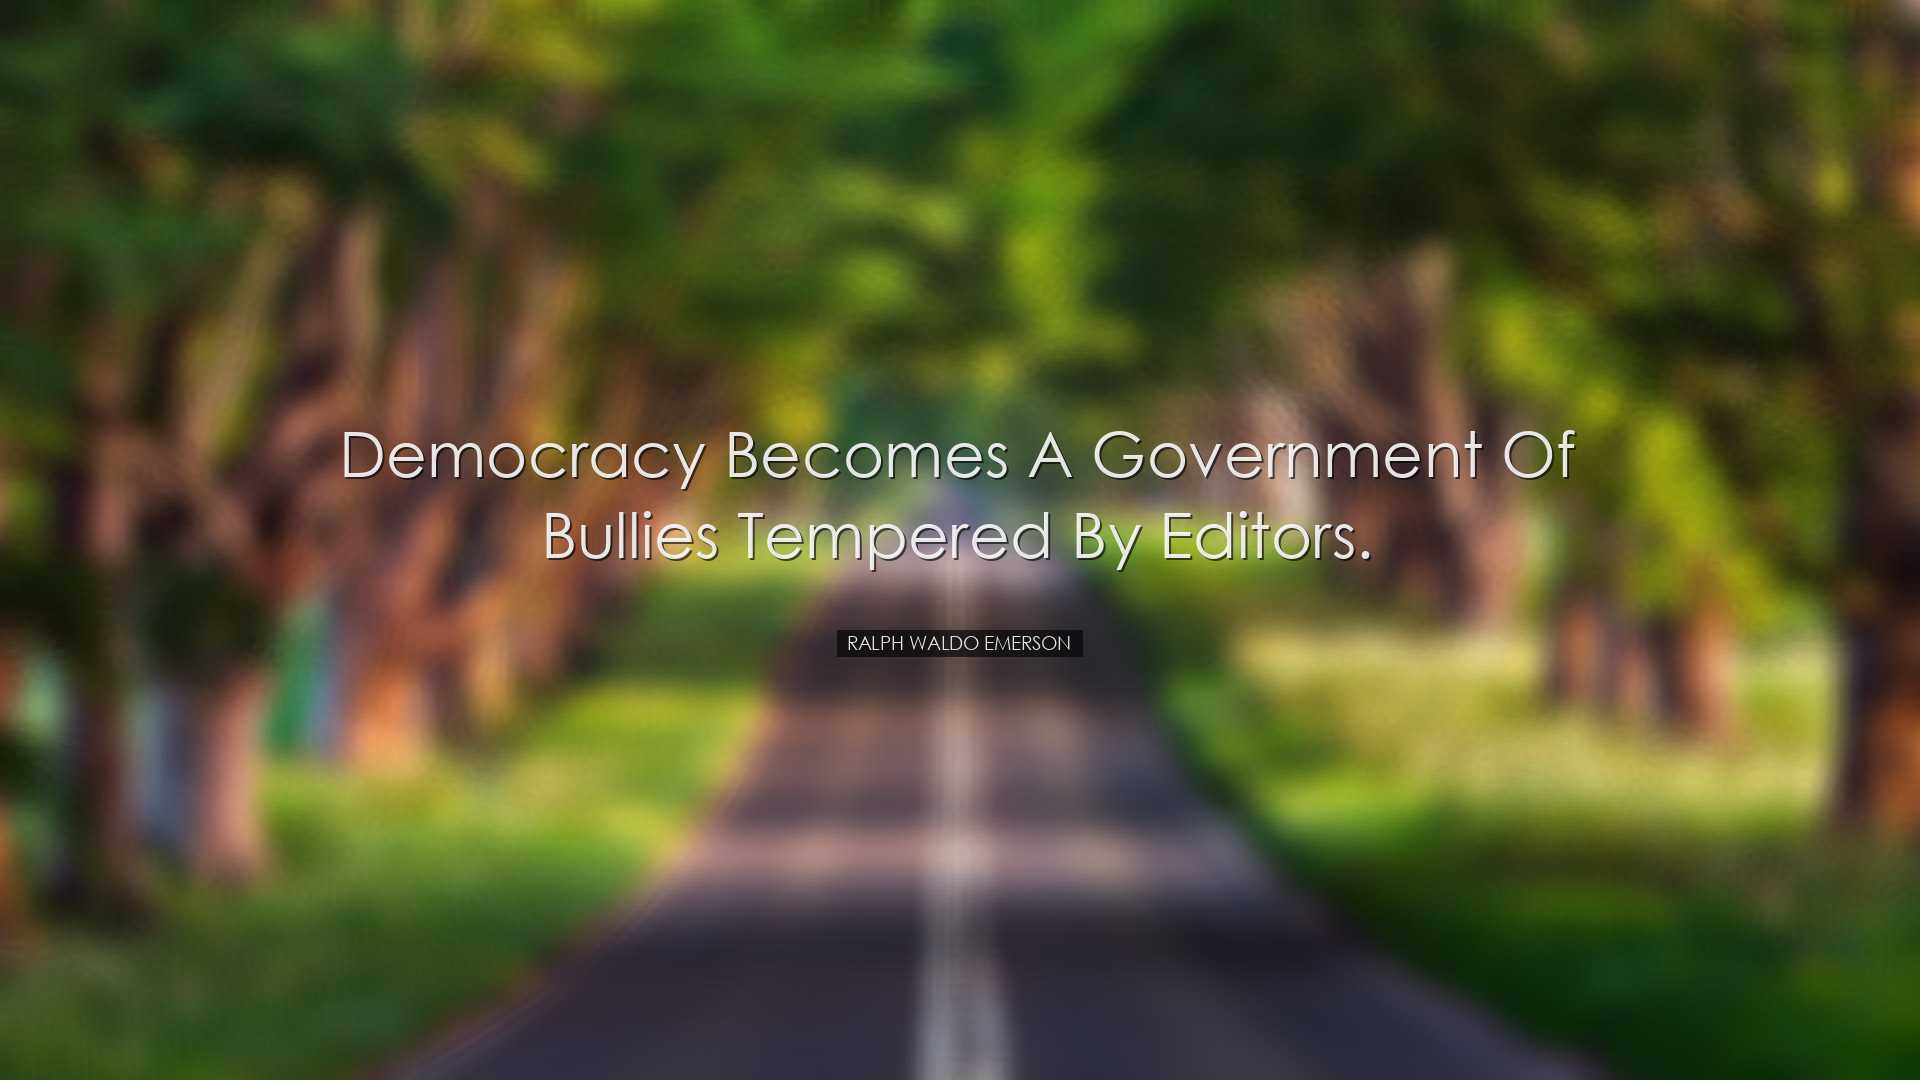 Democracy becomes a government of bullies tempered by editors. - R